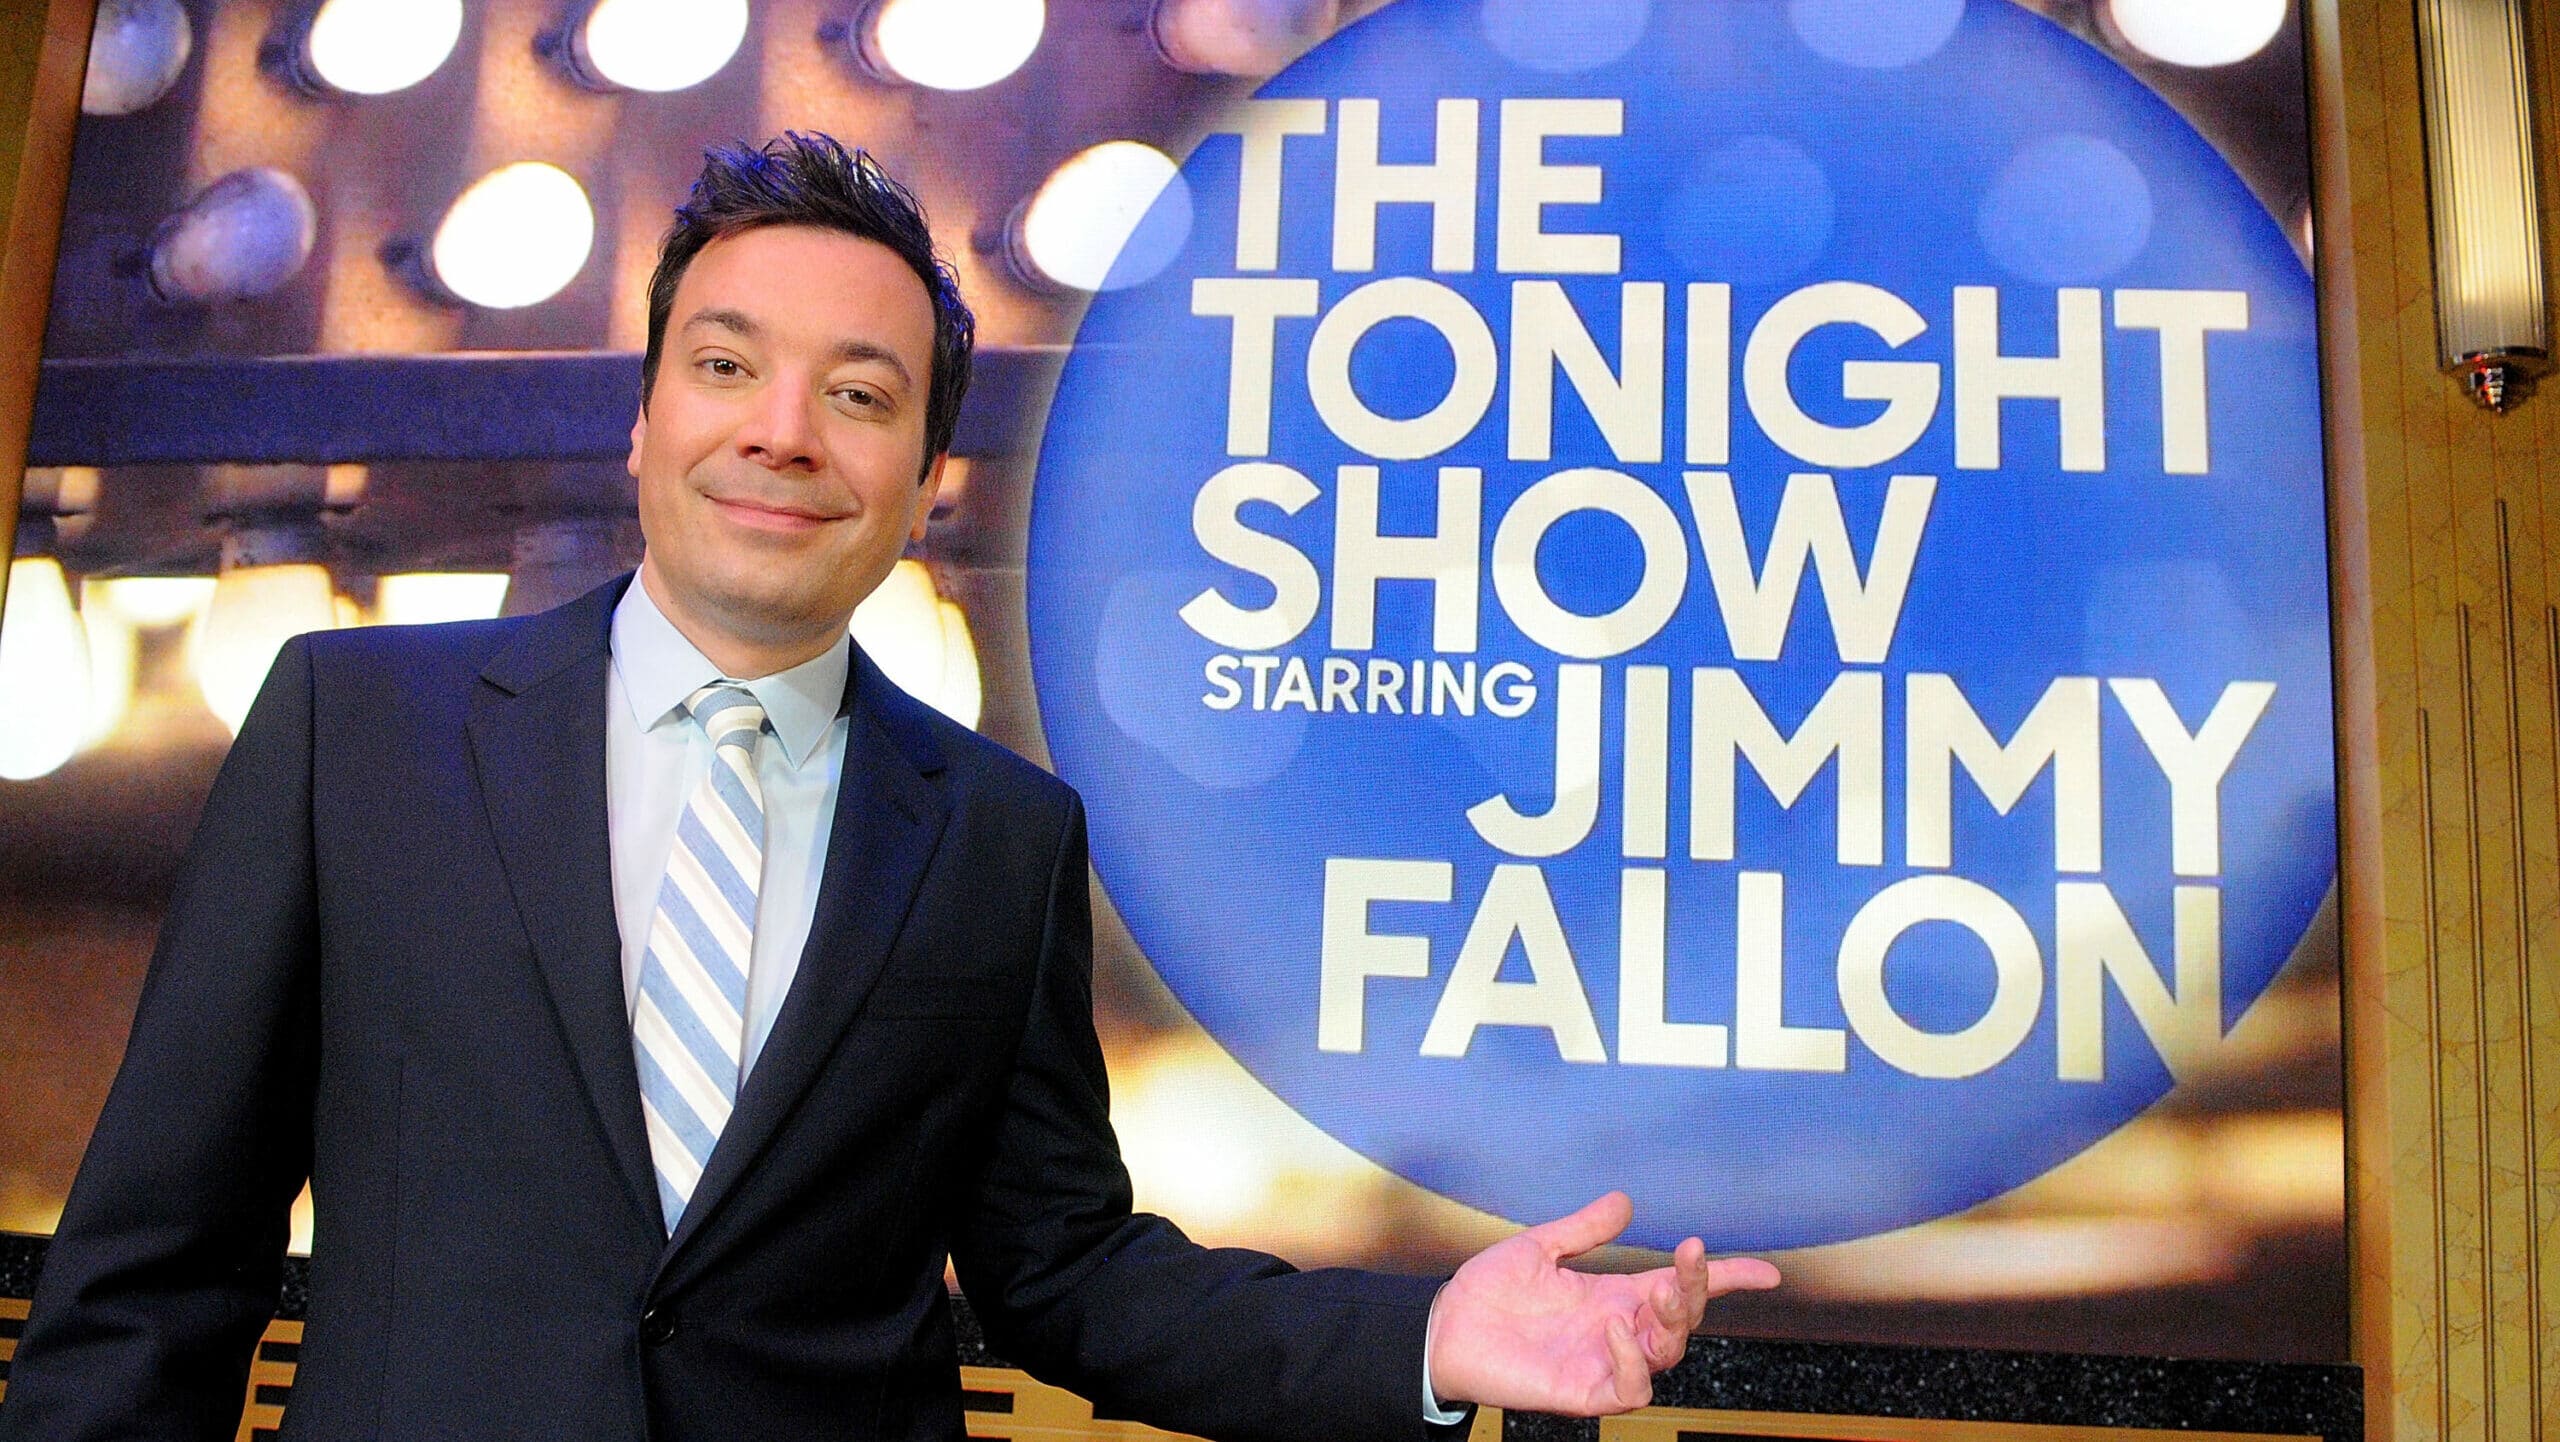 Jimmy Fallon poses during a presentation for the media of the Universal Orlando's Newest Attraction "Race Through New York Starring Jimmy Fallon" at Universal Orlando on April 3, 2017 in Orlando, Florida.